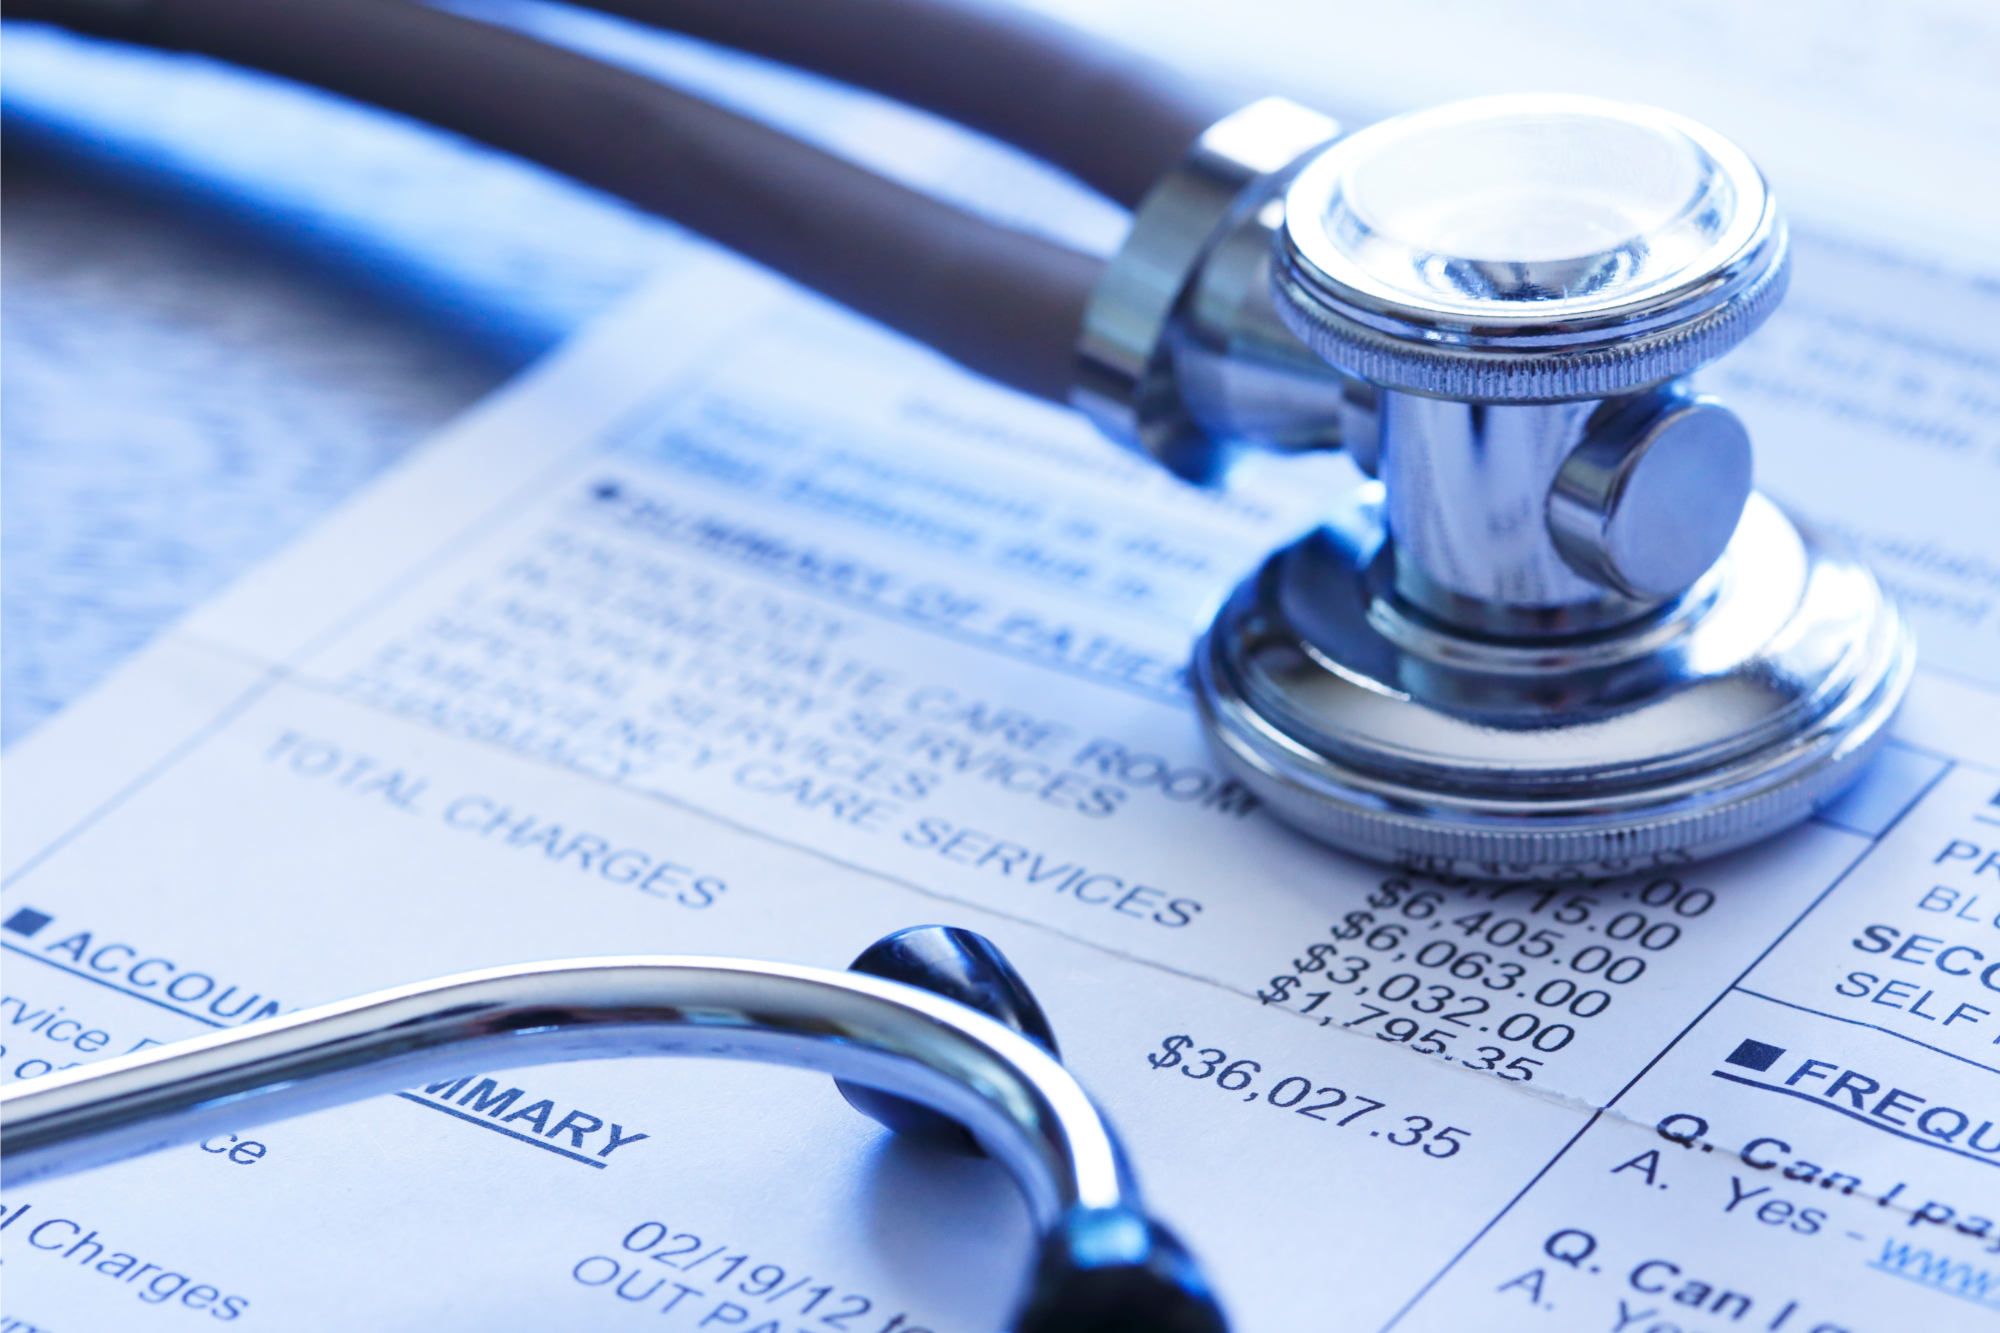 How funding uncertainty impacts healthcare providers